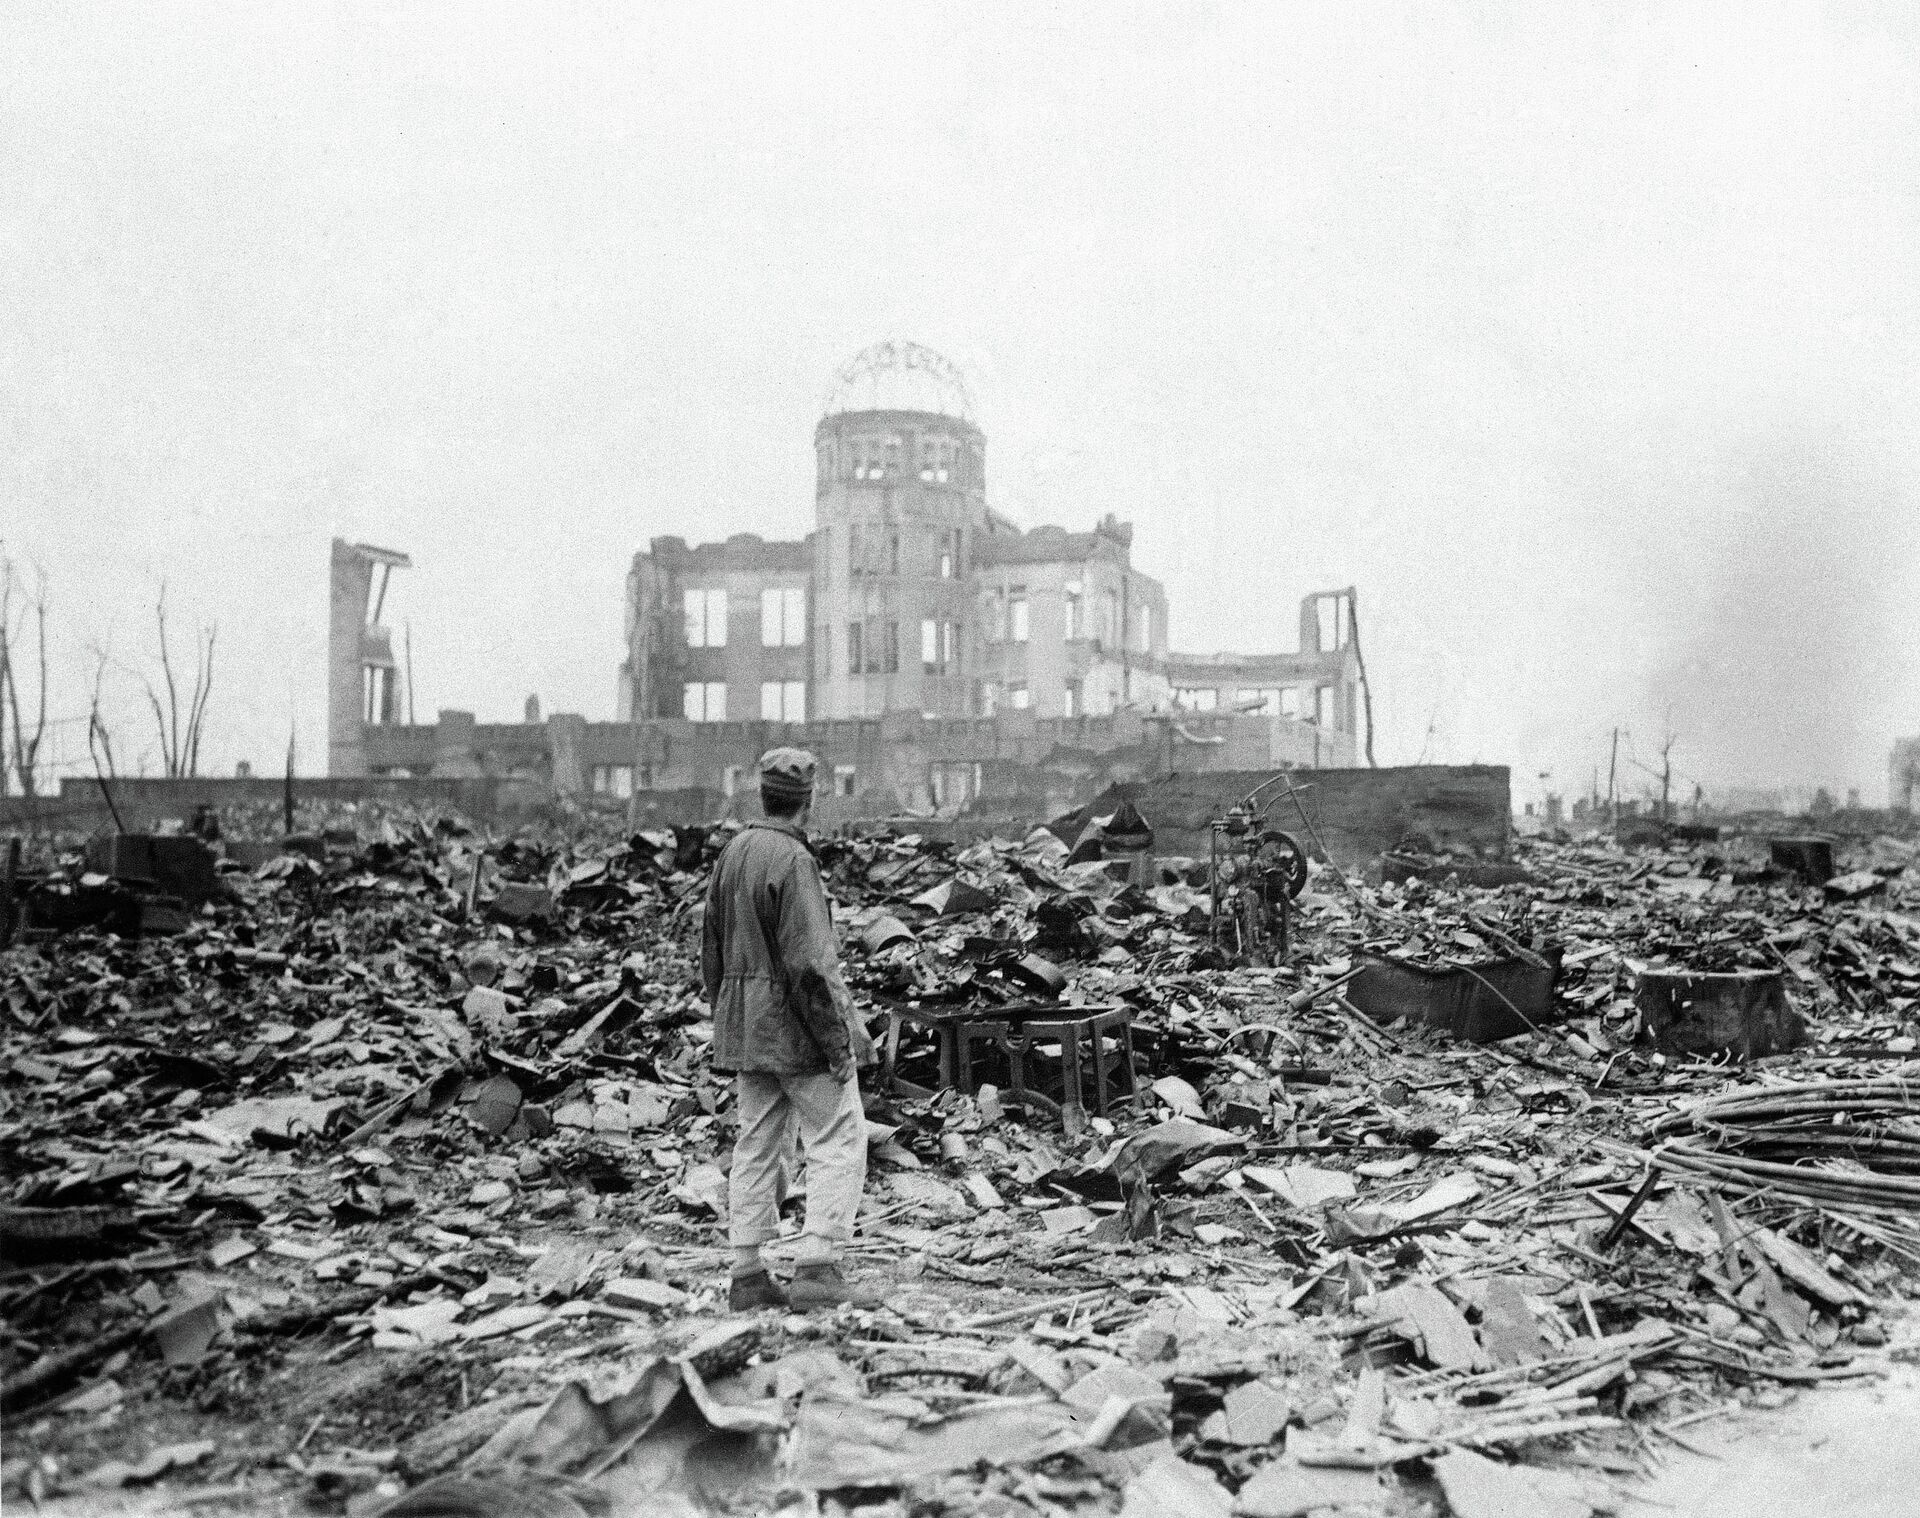 An allied correspondent stands in the rubble in front of the shell of a building that once was a movie theater in Hiroshima, Japan, a month after the first atomic bomb ever used in warfare was dropped by the U.S. on Aug. 6, 1945 - Sputnik International, 1920, 28.03.2022